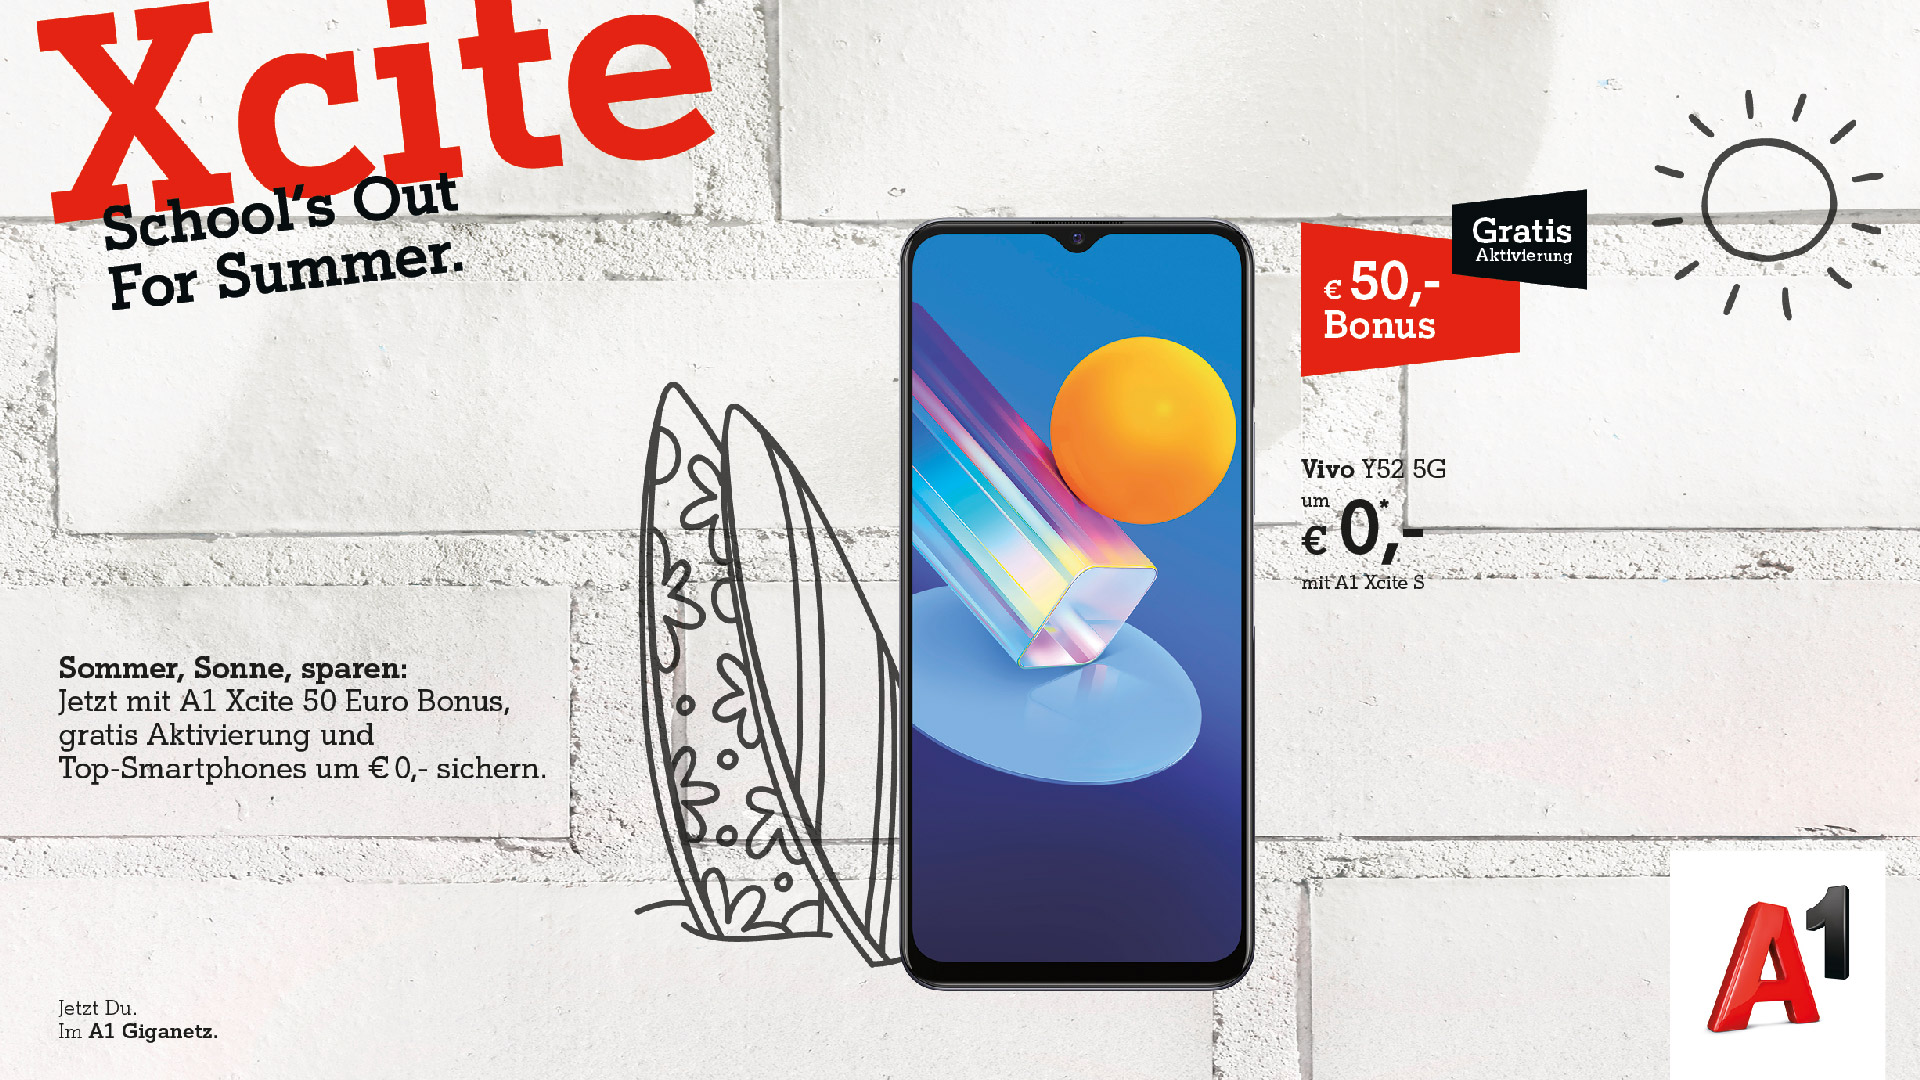 Xcite School's Out For Summer. Vivo Y52 5G um €0,- mit A1 Xcite S